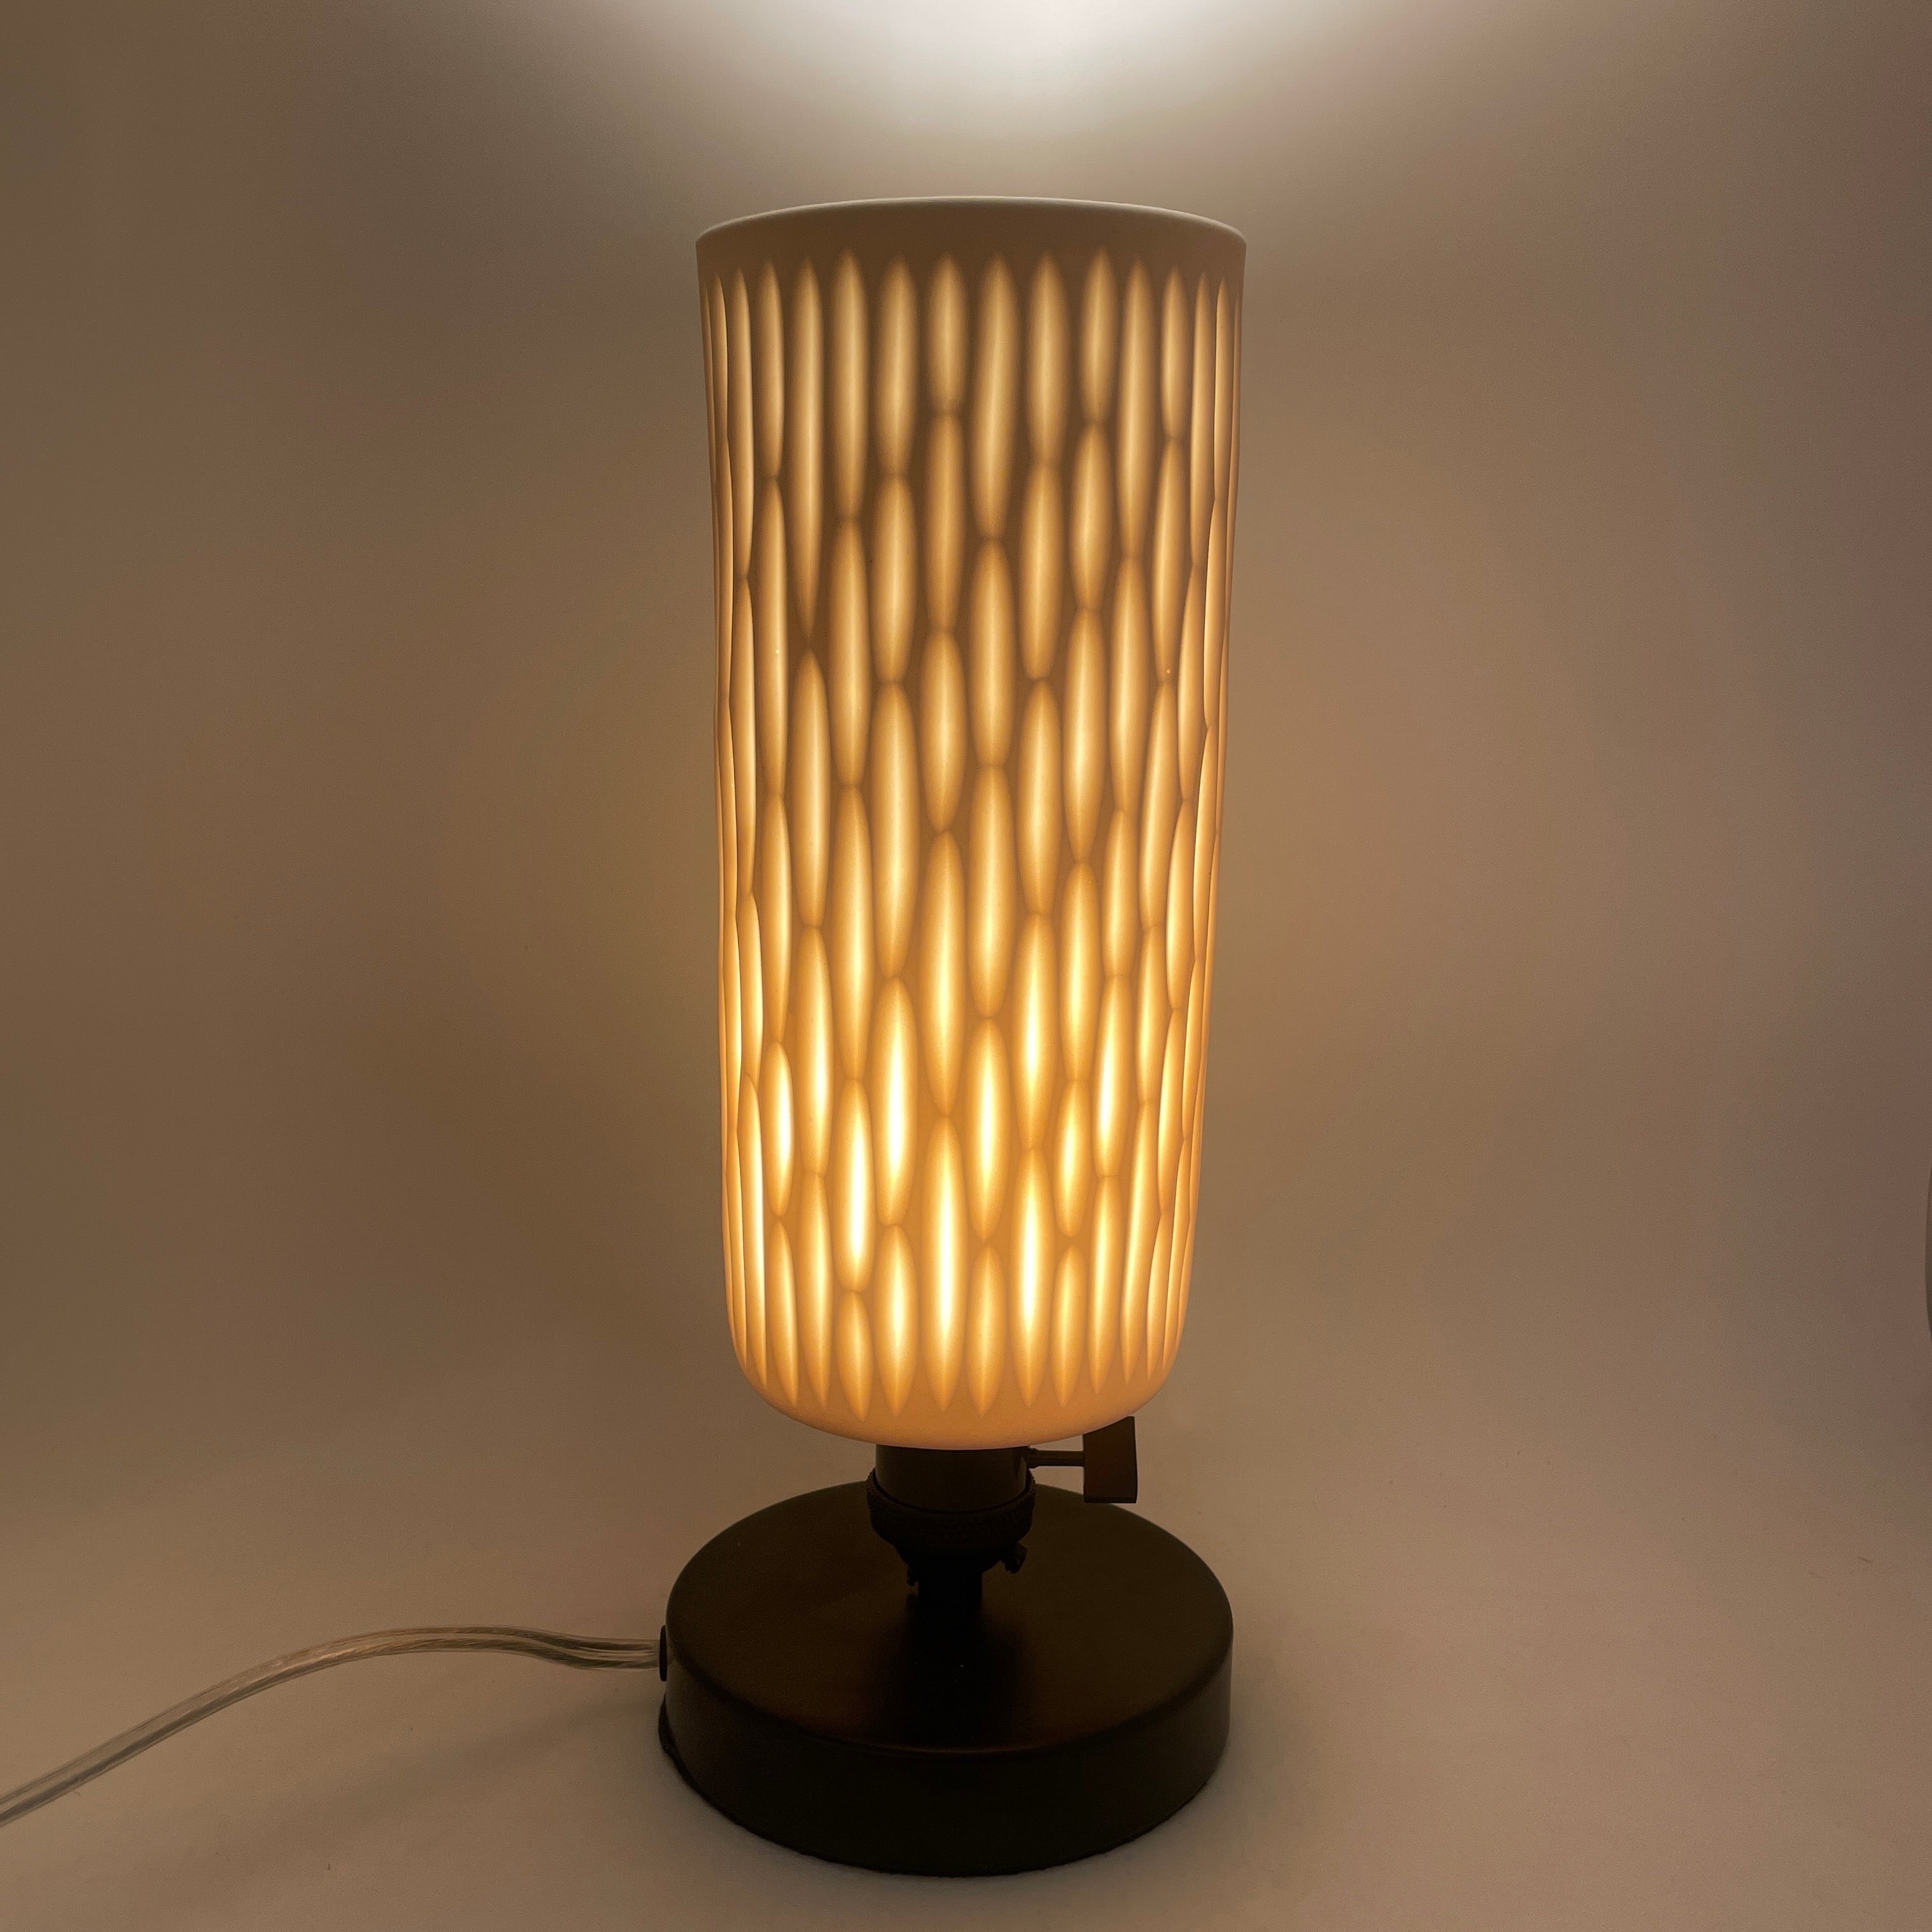 *Now Preorder* Table Lamp- "Spires" hand-carved White Porcelain Shade and Choice of Base (ship by Dec 15th)